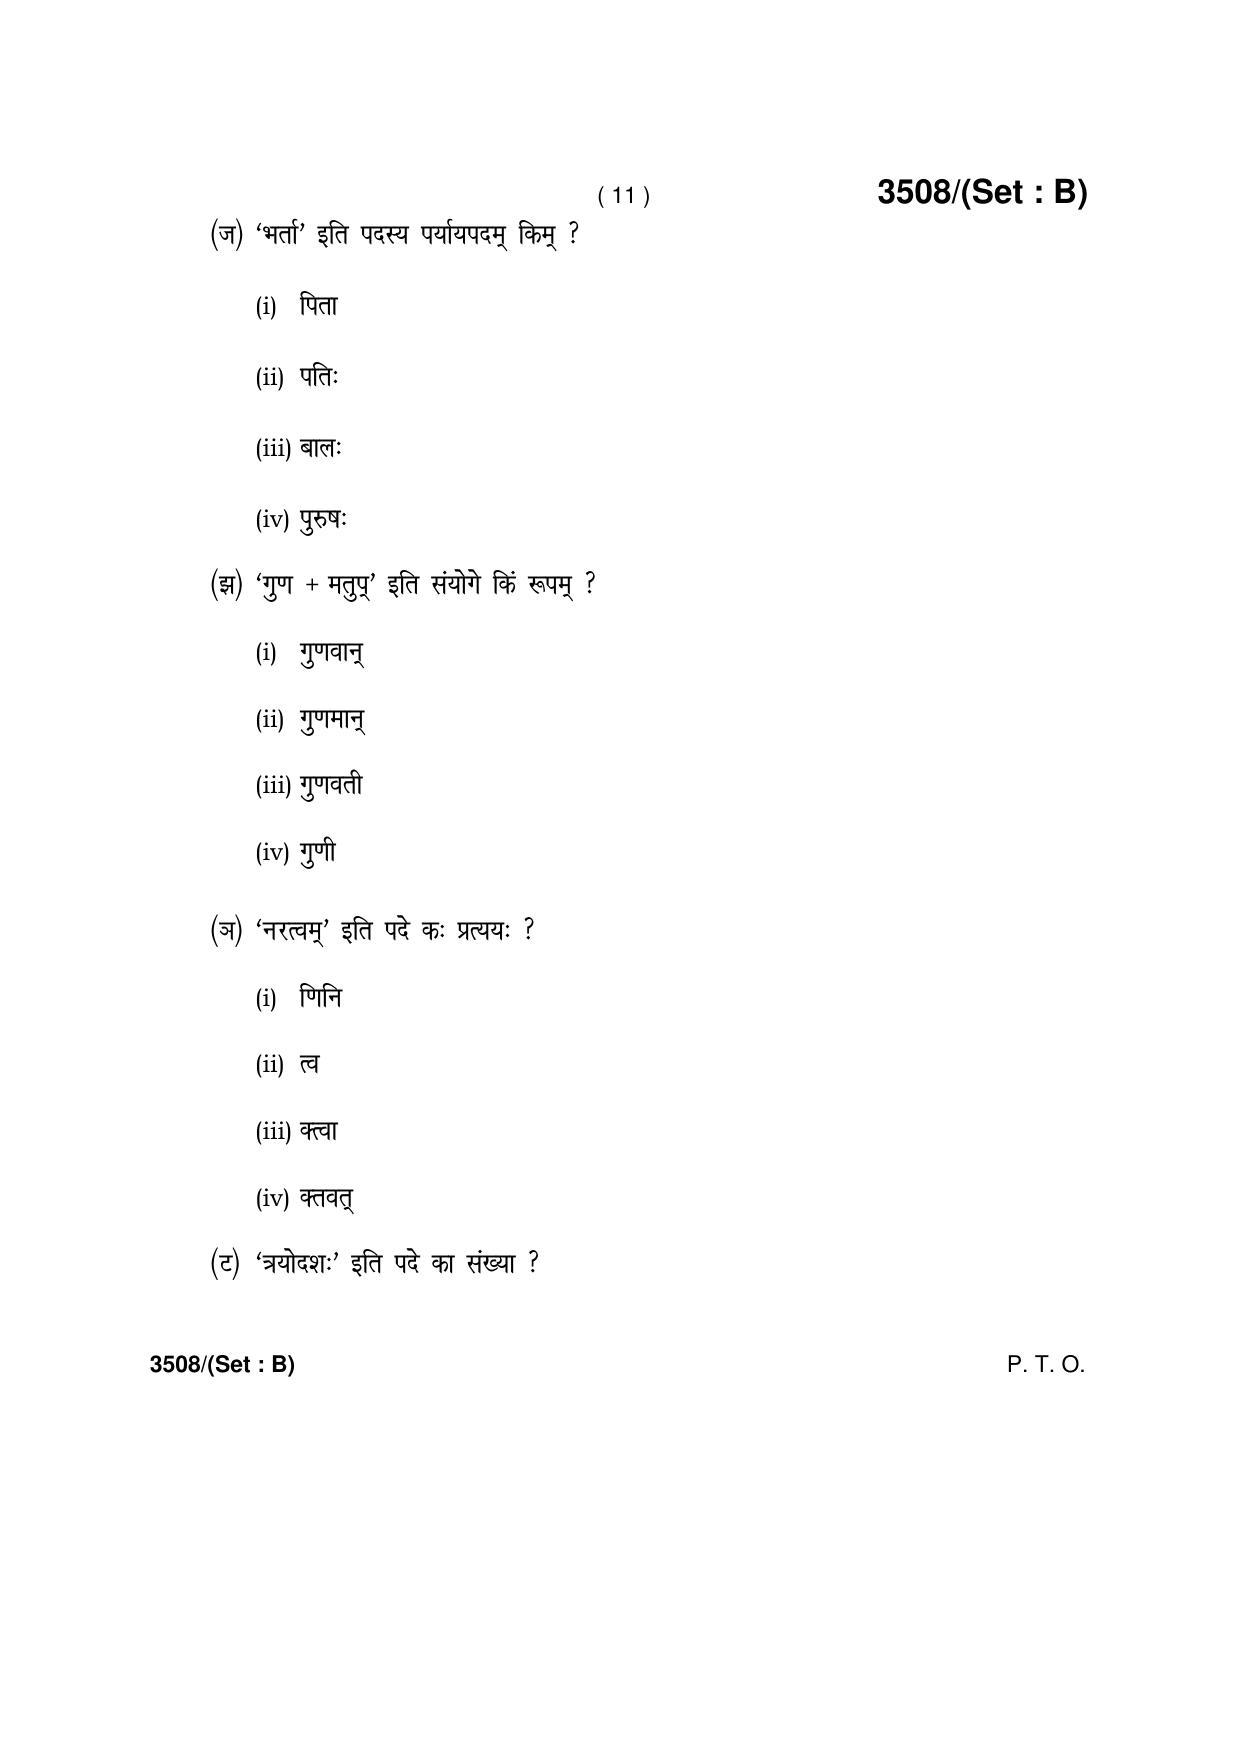 Haryana Board HBSE Class 10 Sanskrit -B 2018 Question Paper - Page 11